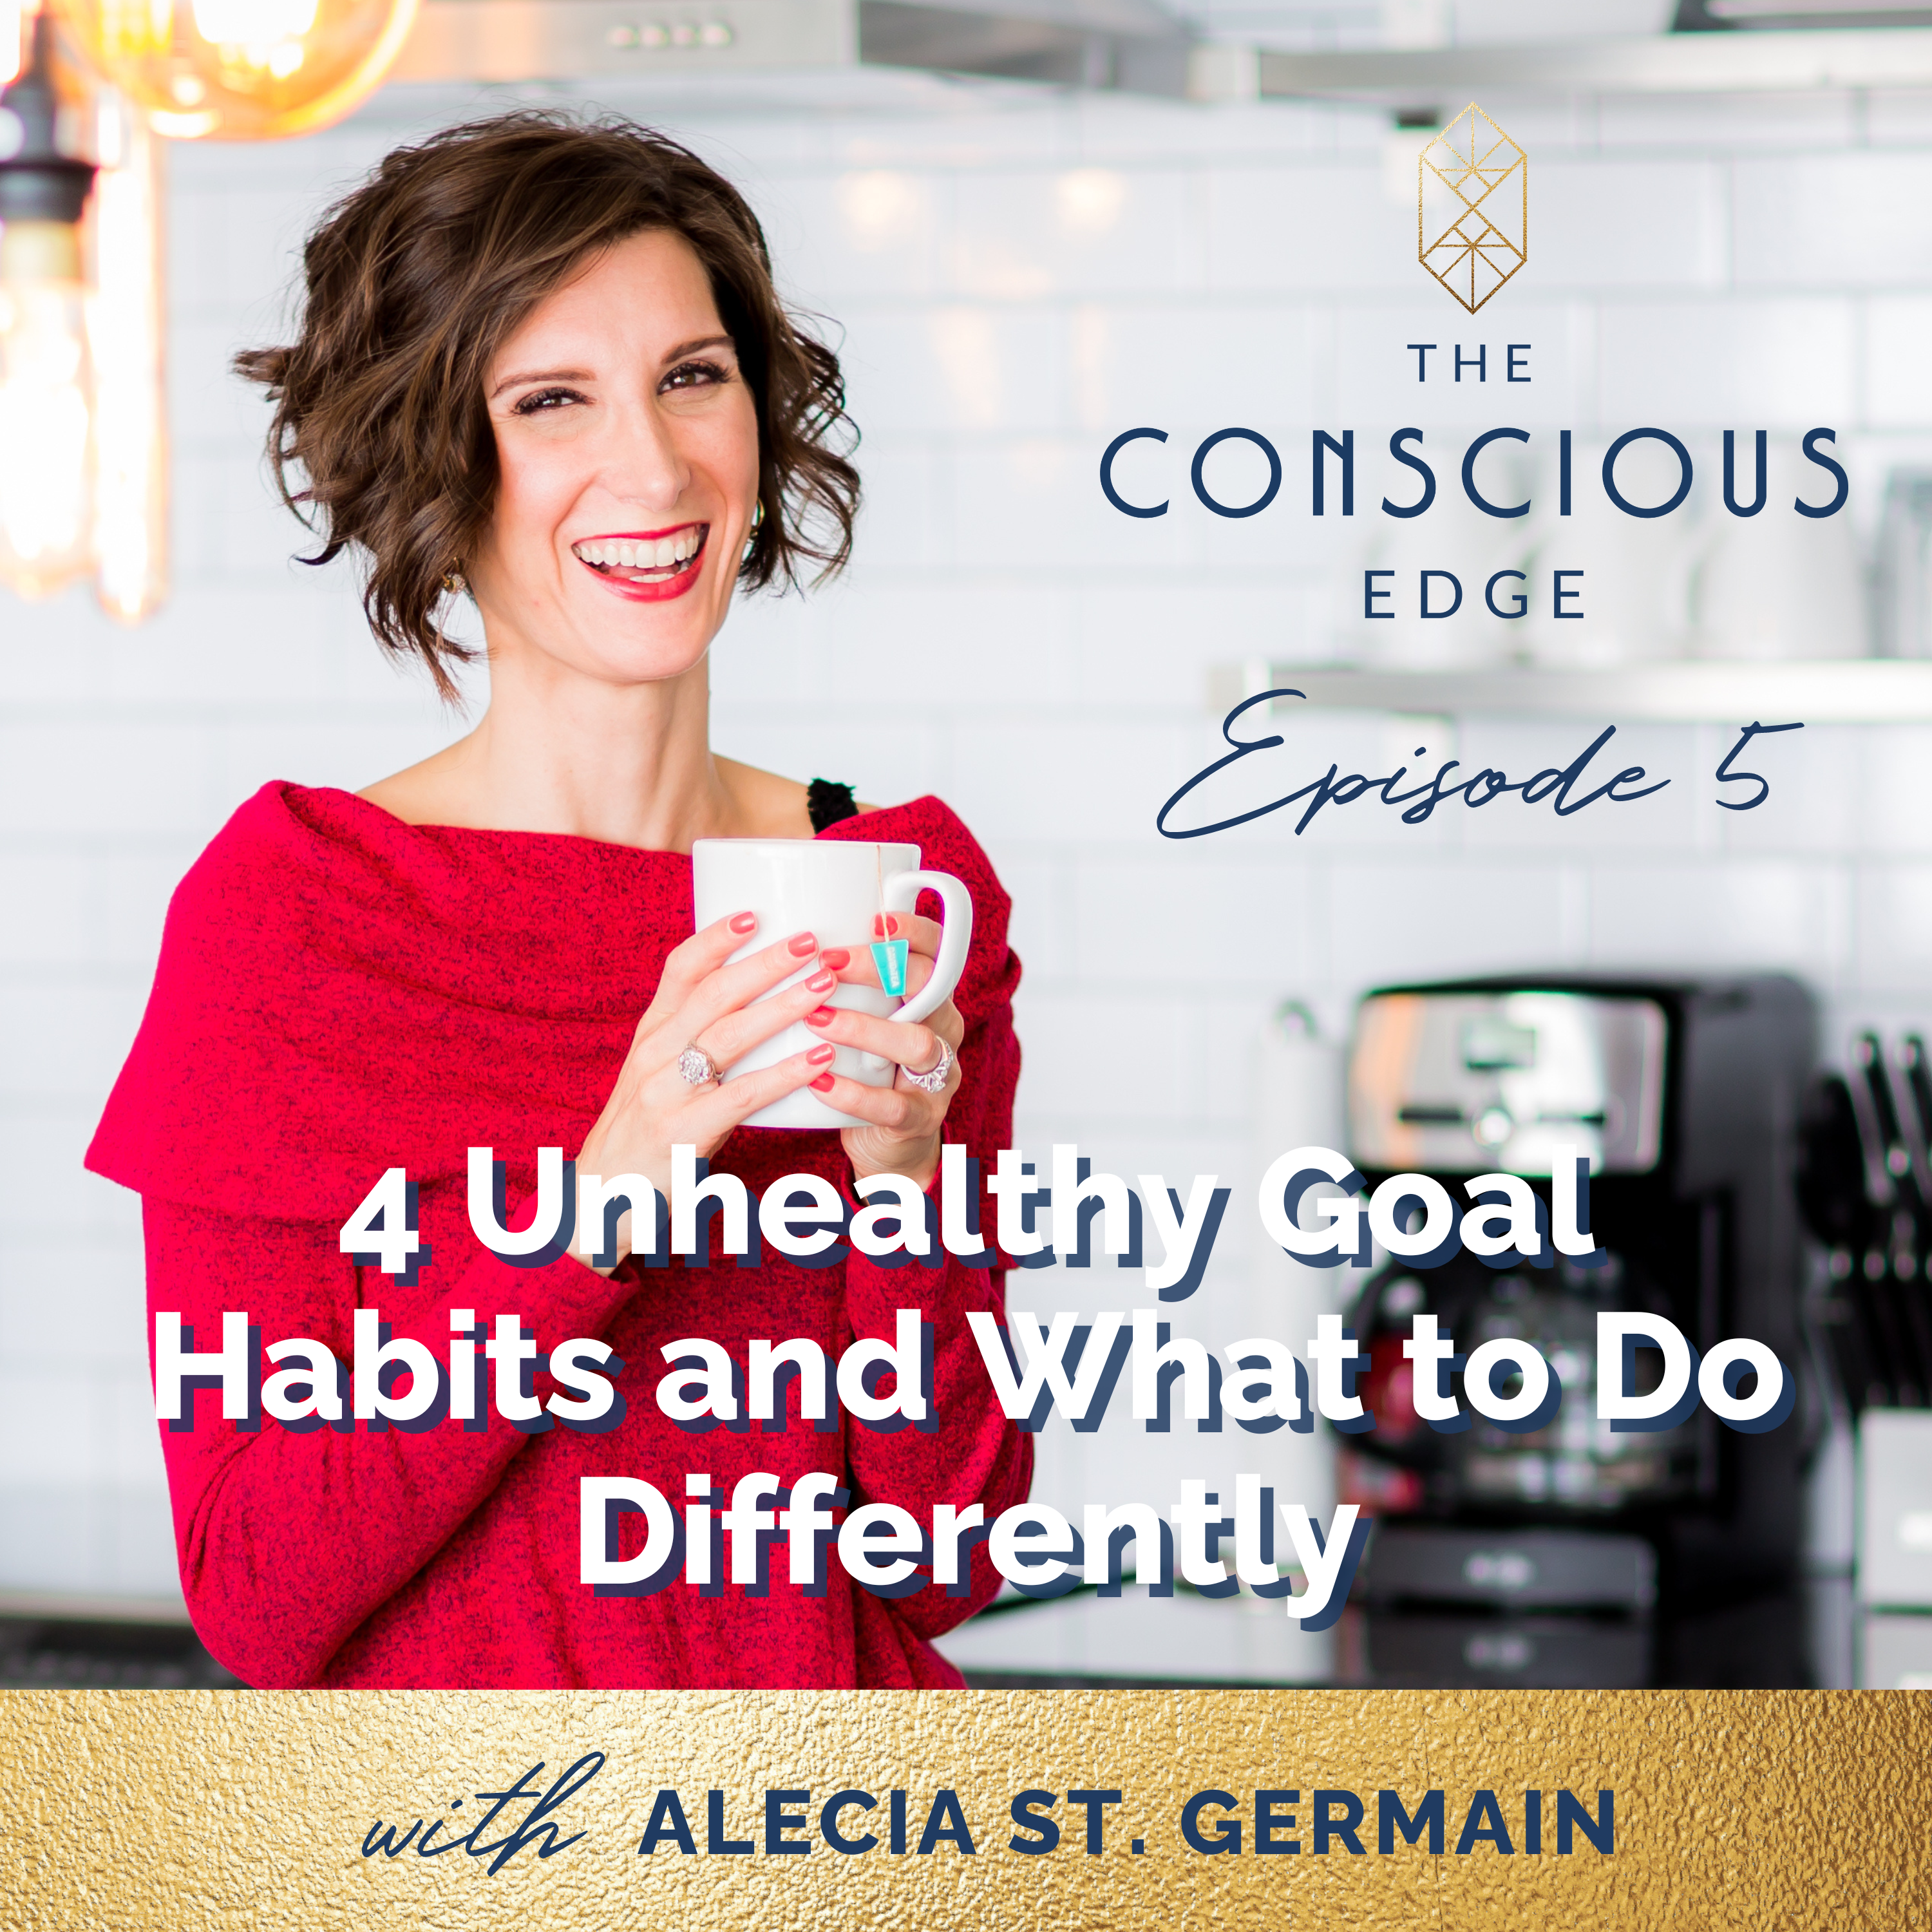 4 Unhealthy Goal Habits and What to Do Differently